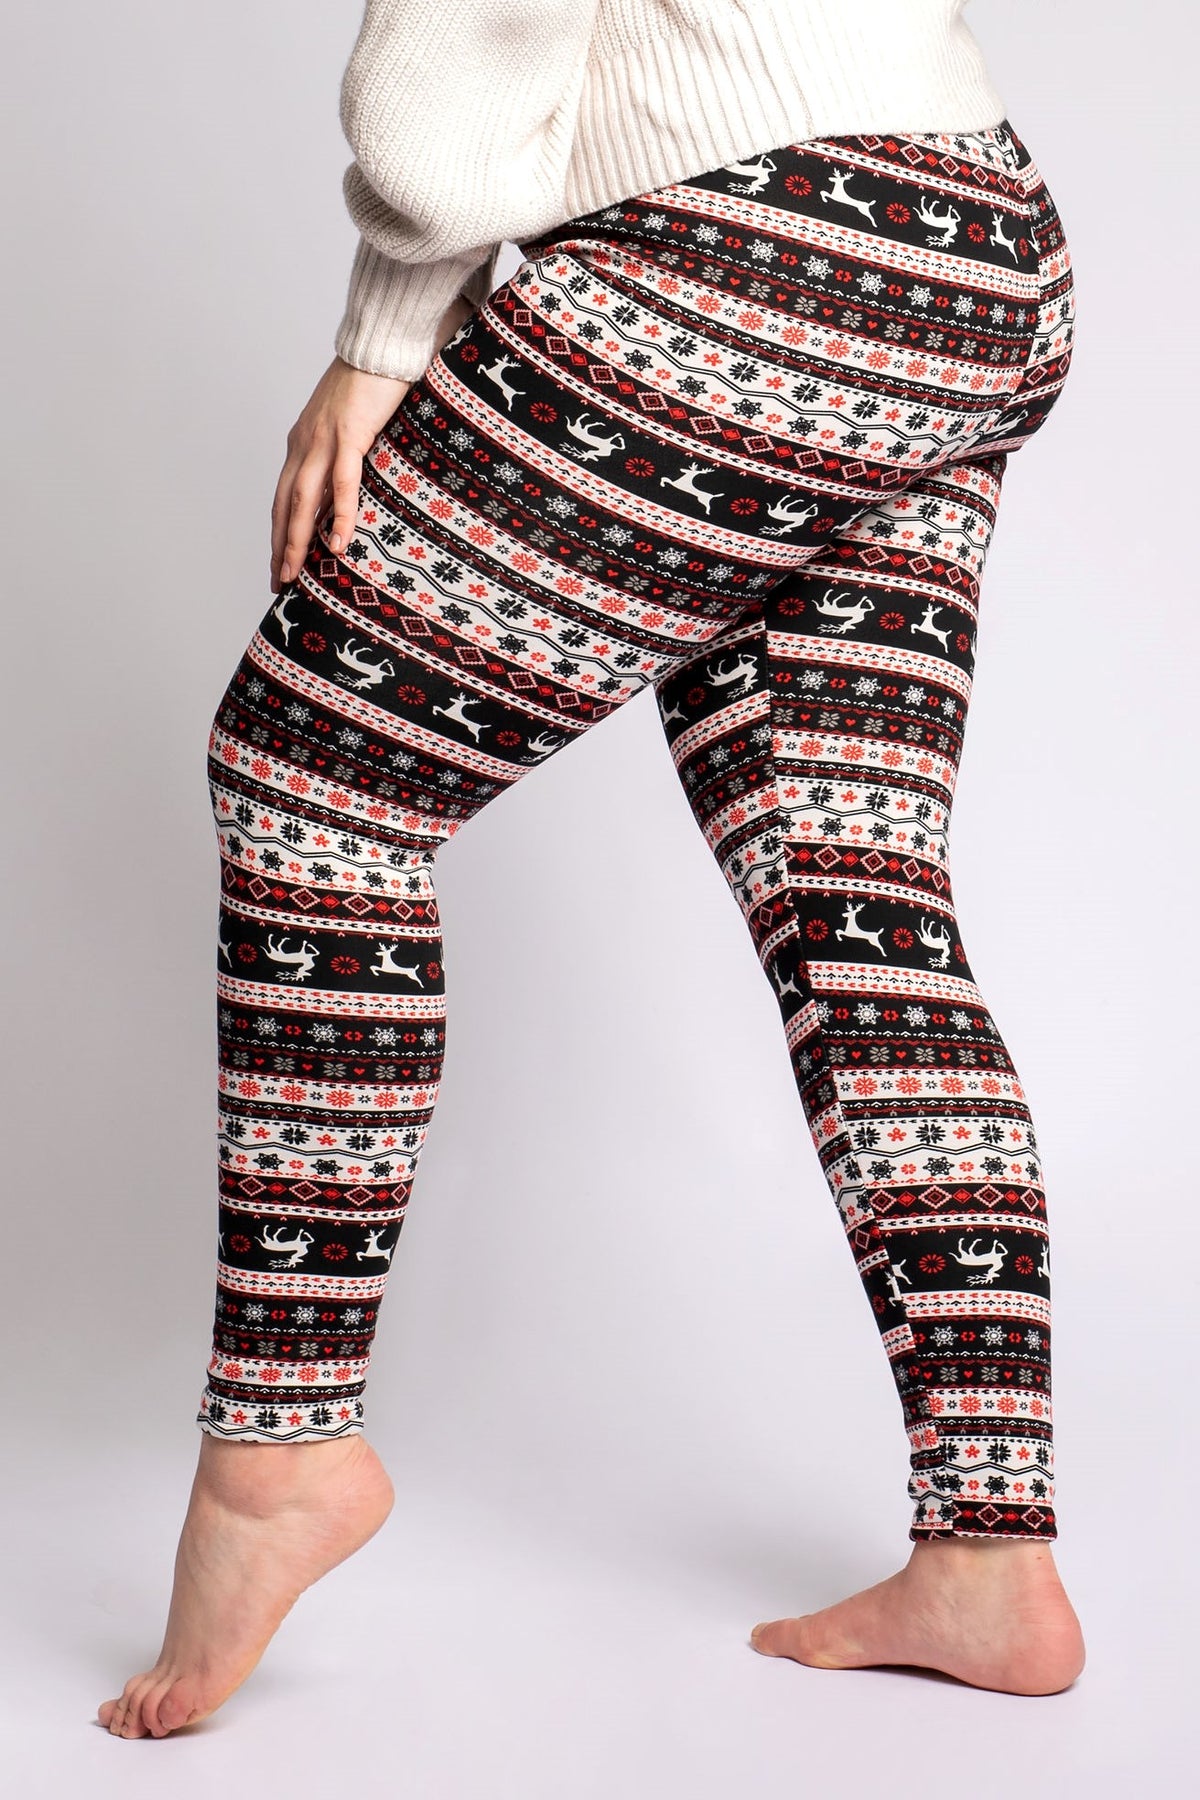 Where Are Just Cozy Leggings Manufactured In Us